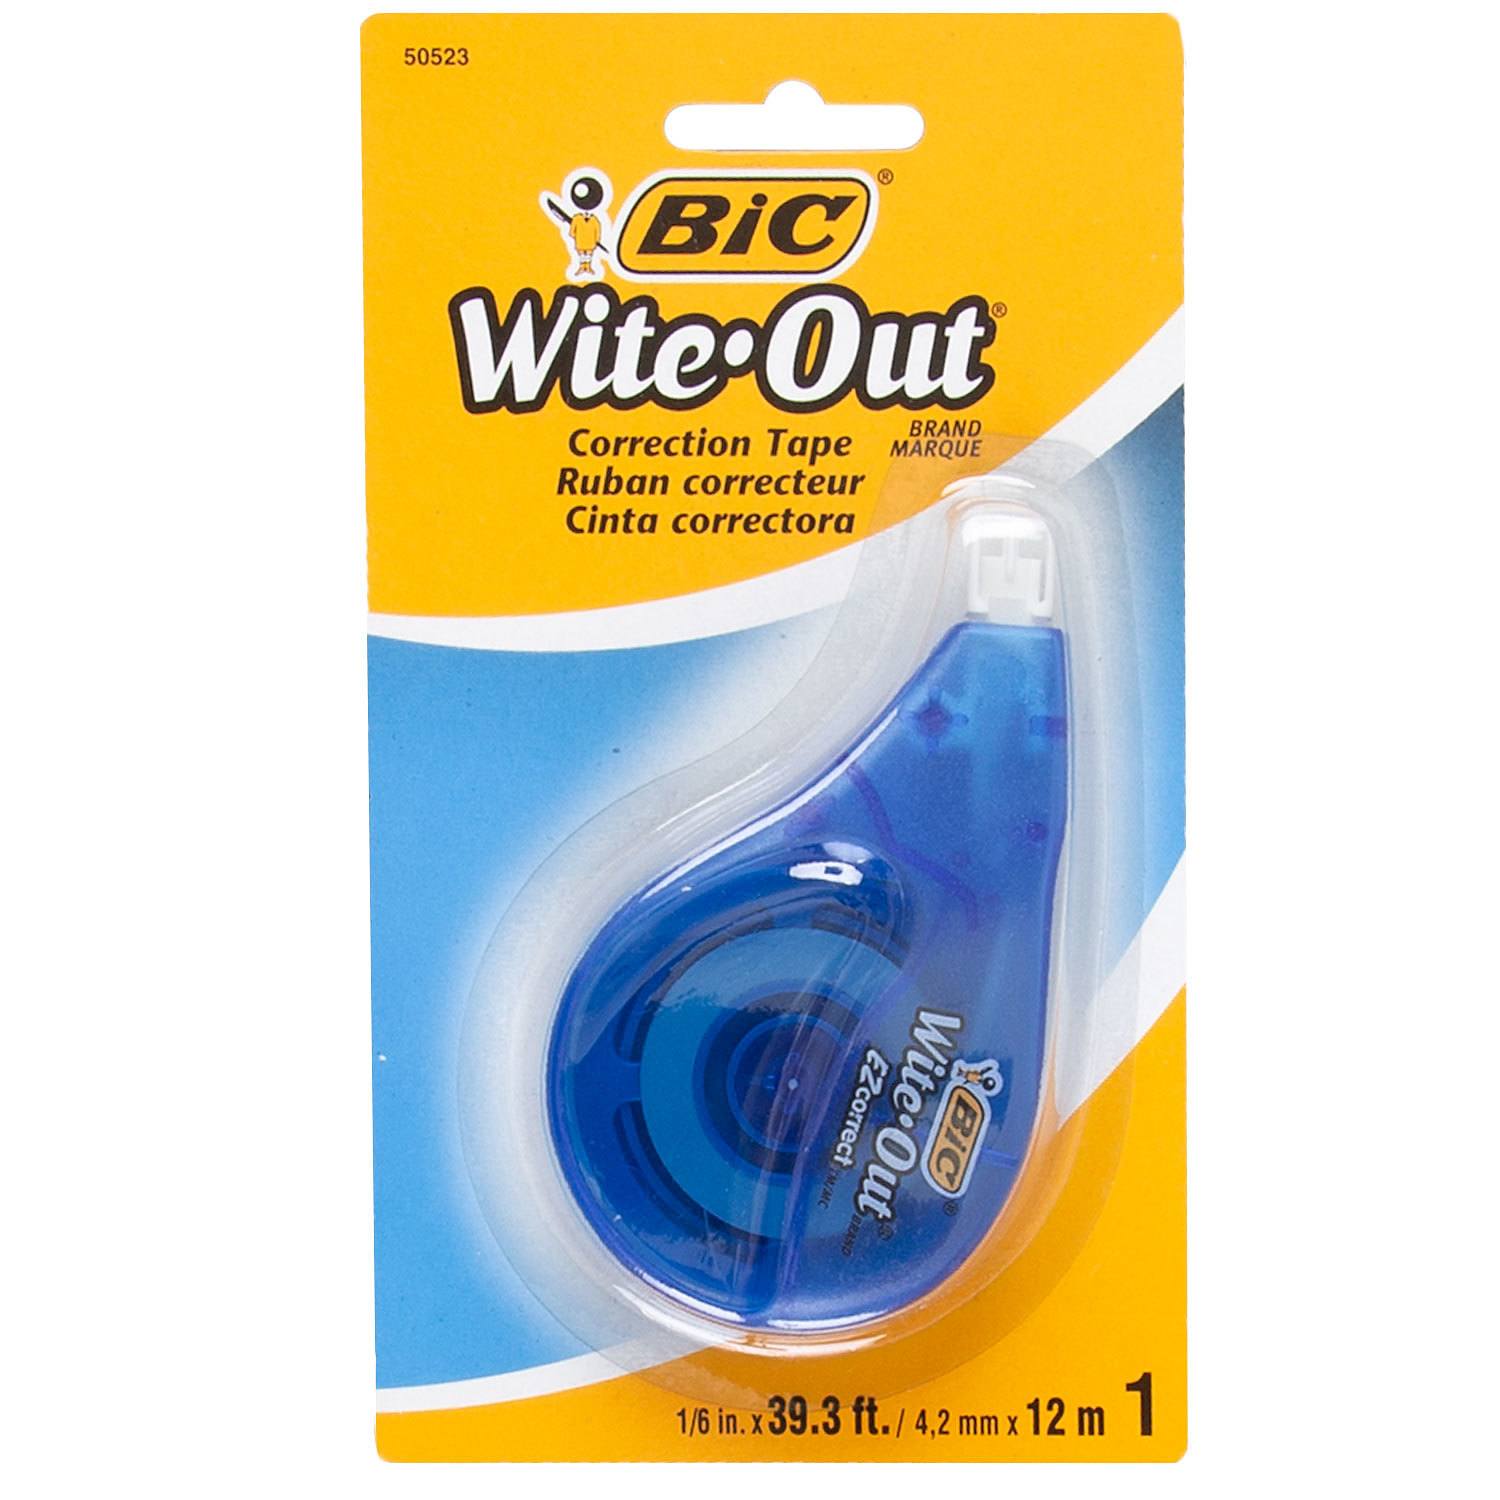 Wite-Out Correction Tape - 0.2 (5.1 mm) Width x 39.4 ft Length